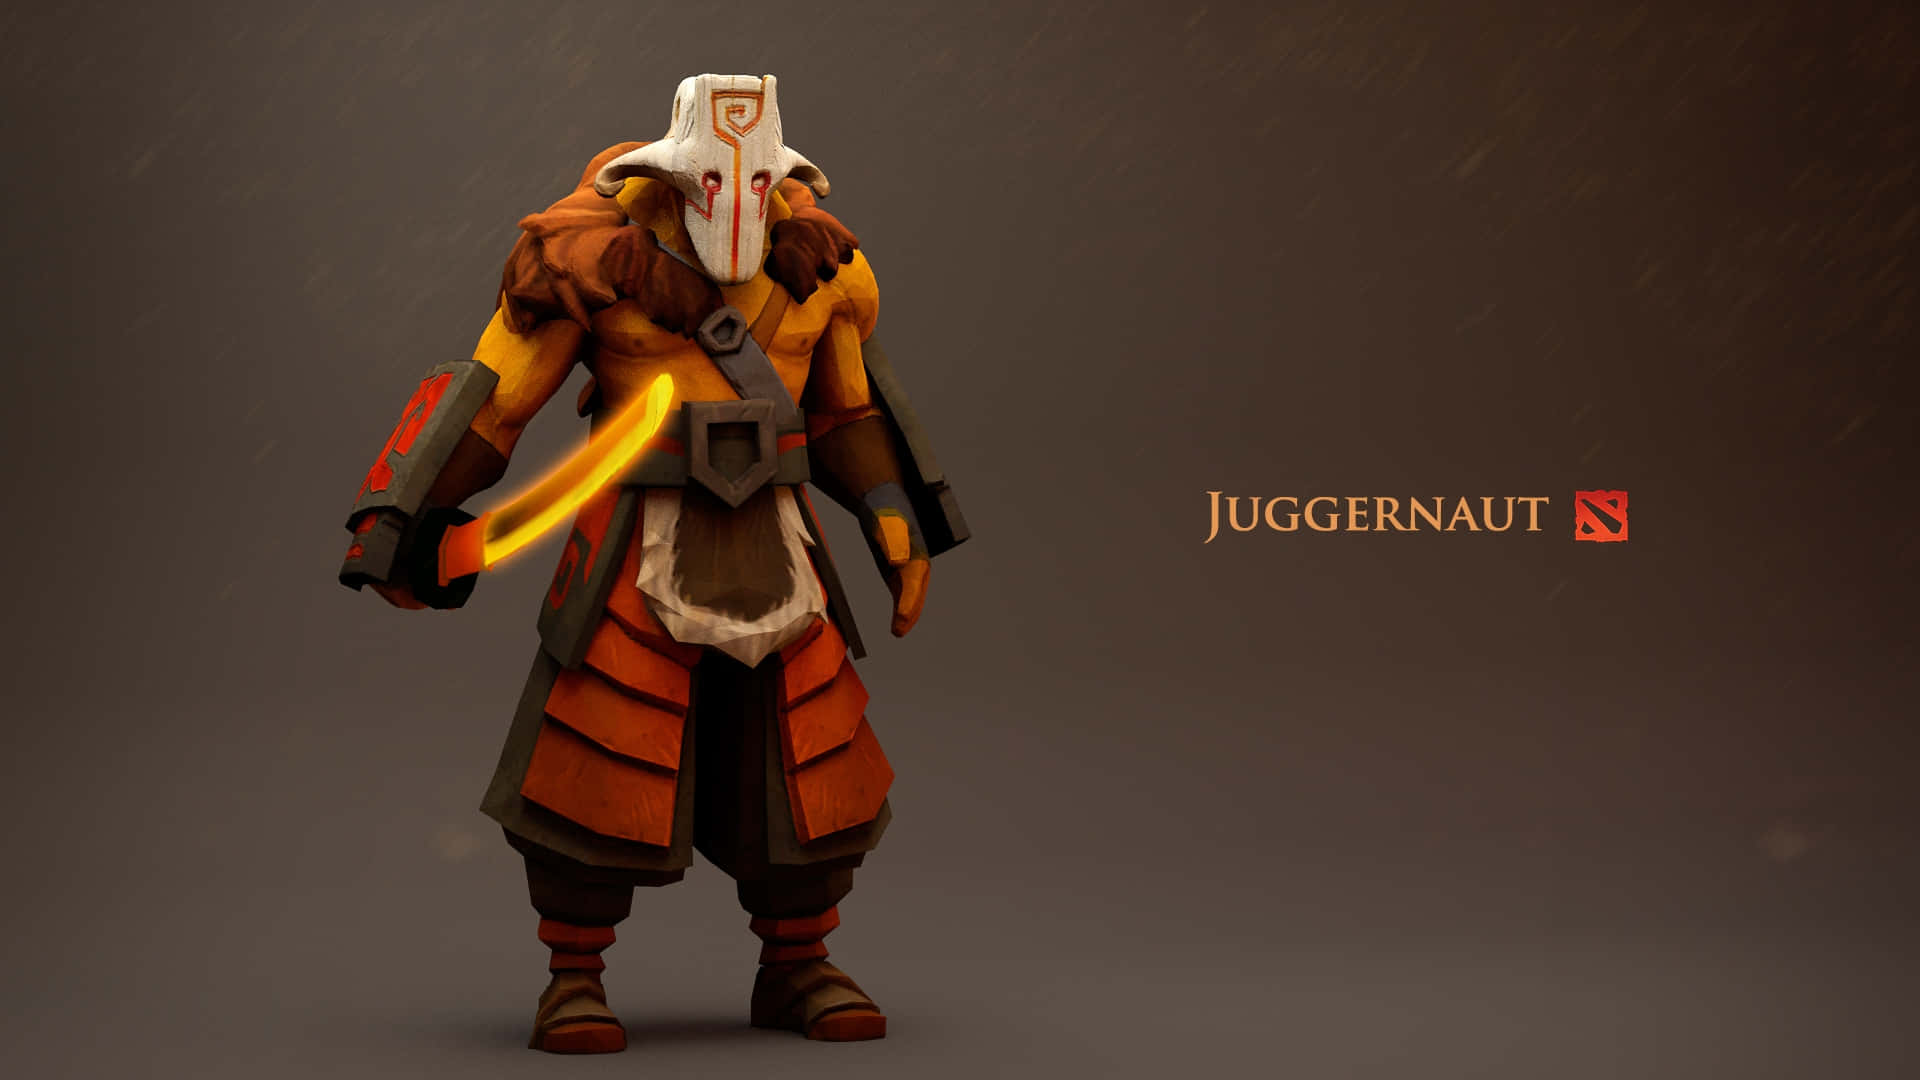 Join the fray and unleash the power of Dota 2's Juggernaut! Wallpaper